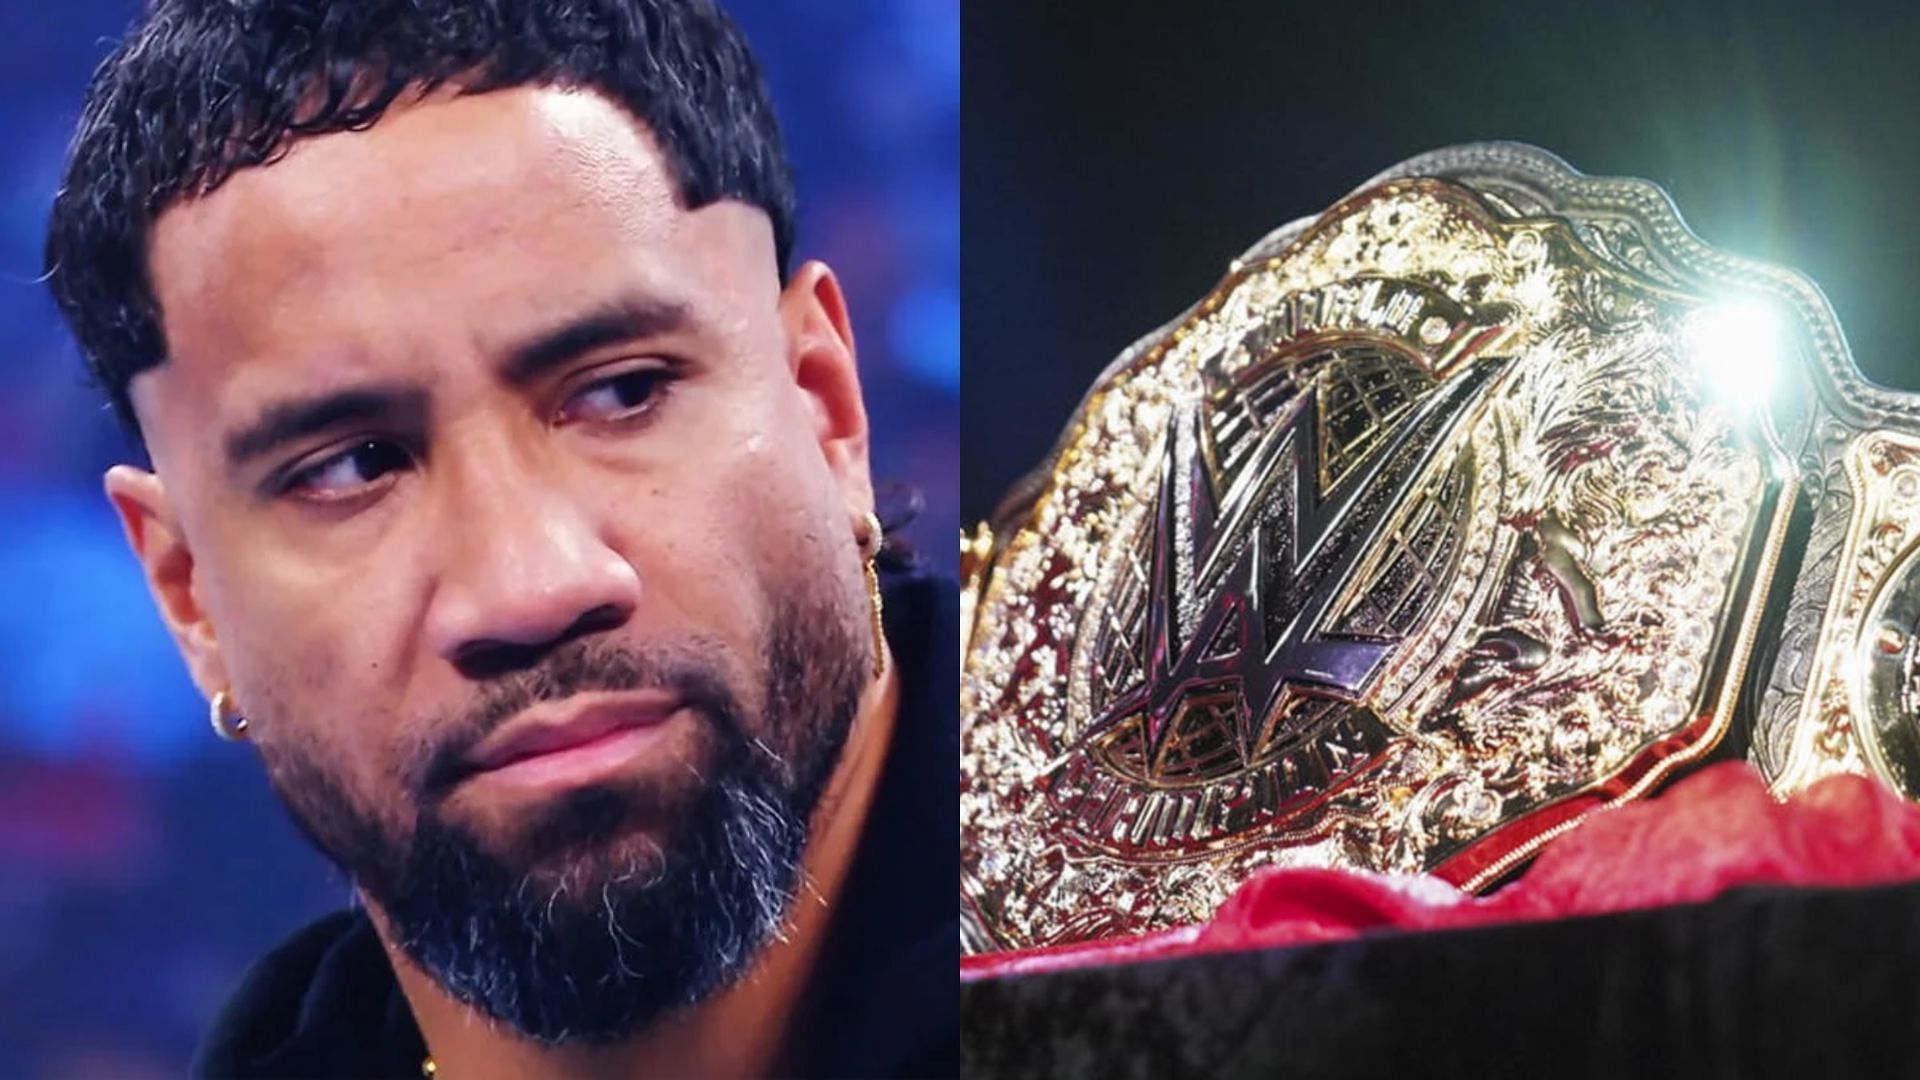 Jey Uso is gunning for the World Heavyweight Championship